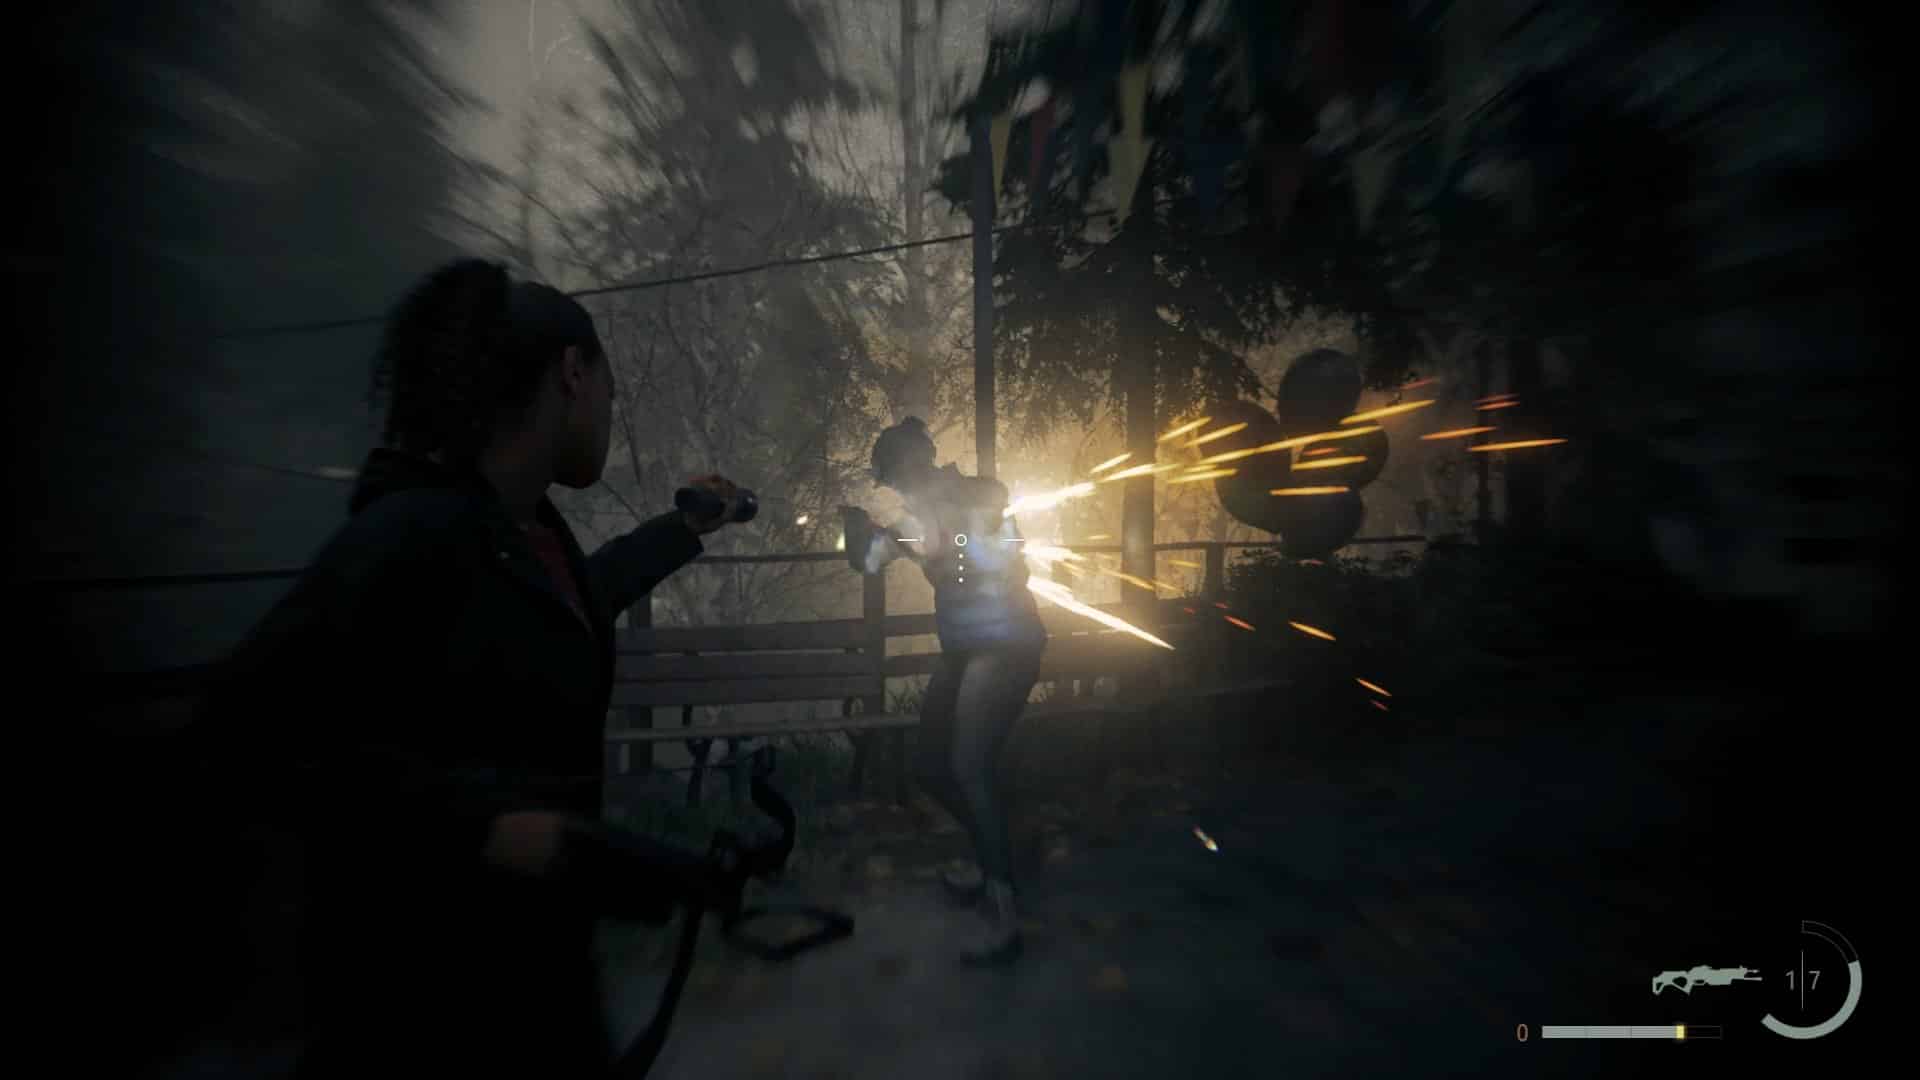 Alan Wake 2 shows off the capabilities of the Northlight Engine